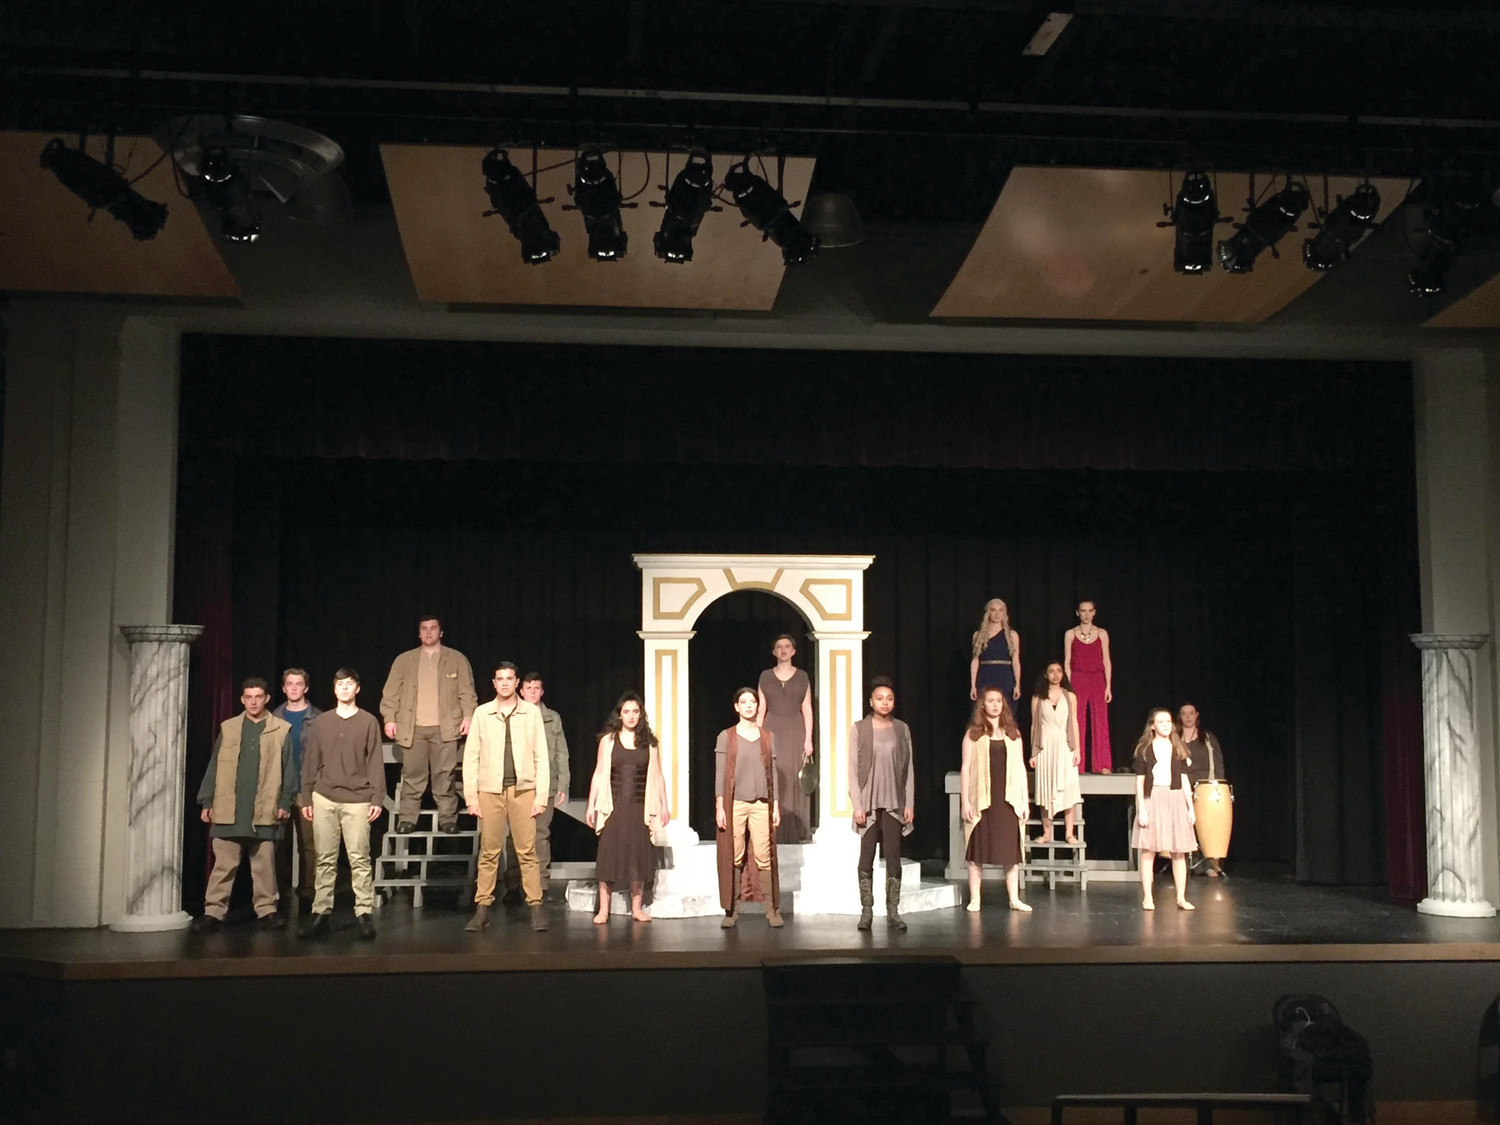 Saint Raphael Academy won the Rhode Island State Drama Festival with its dramatic performance of “Antigone.” An additional performance is being planned before the drama club heads to the regional festival.